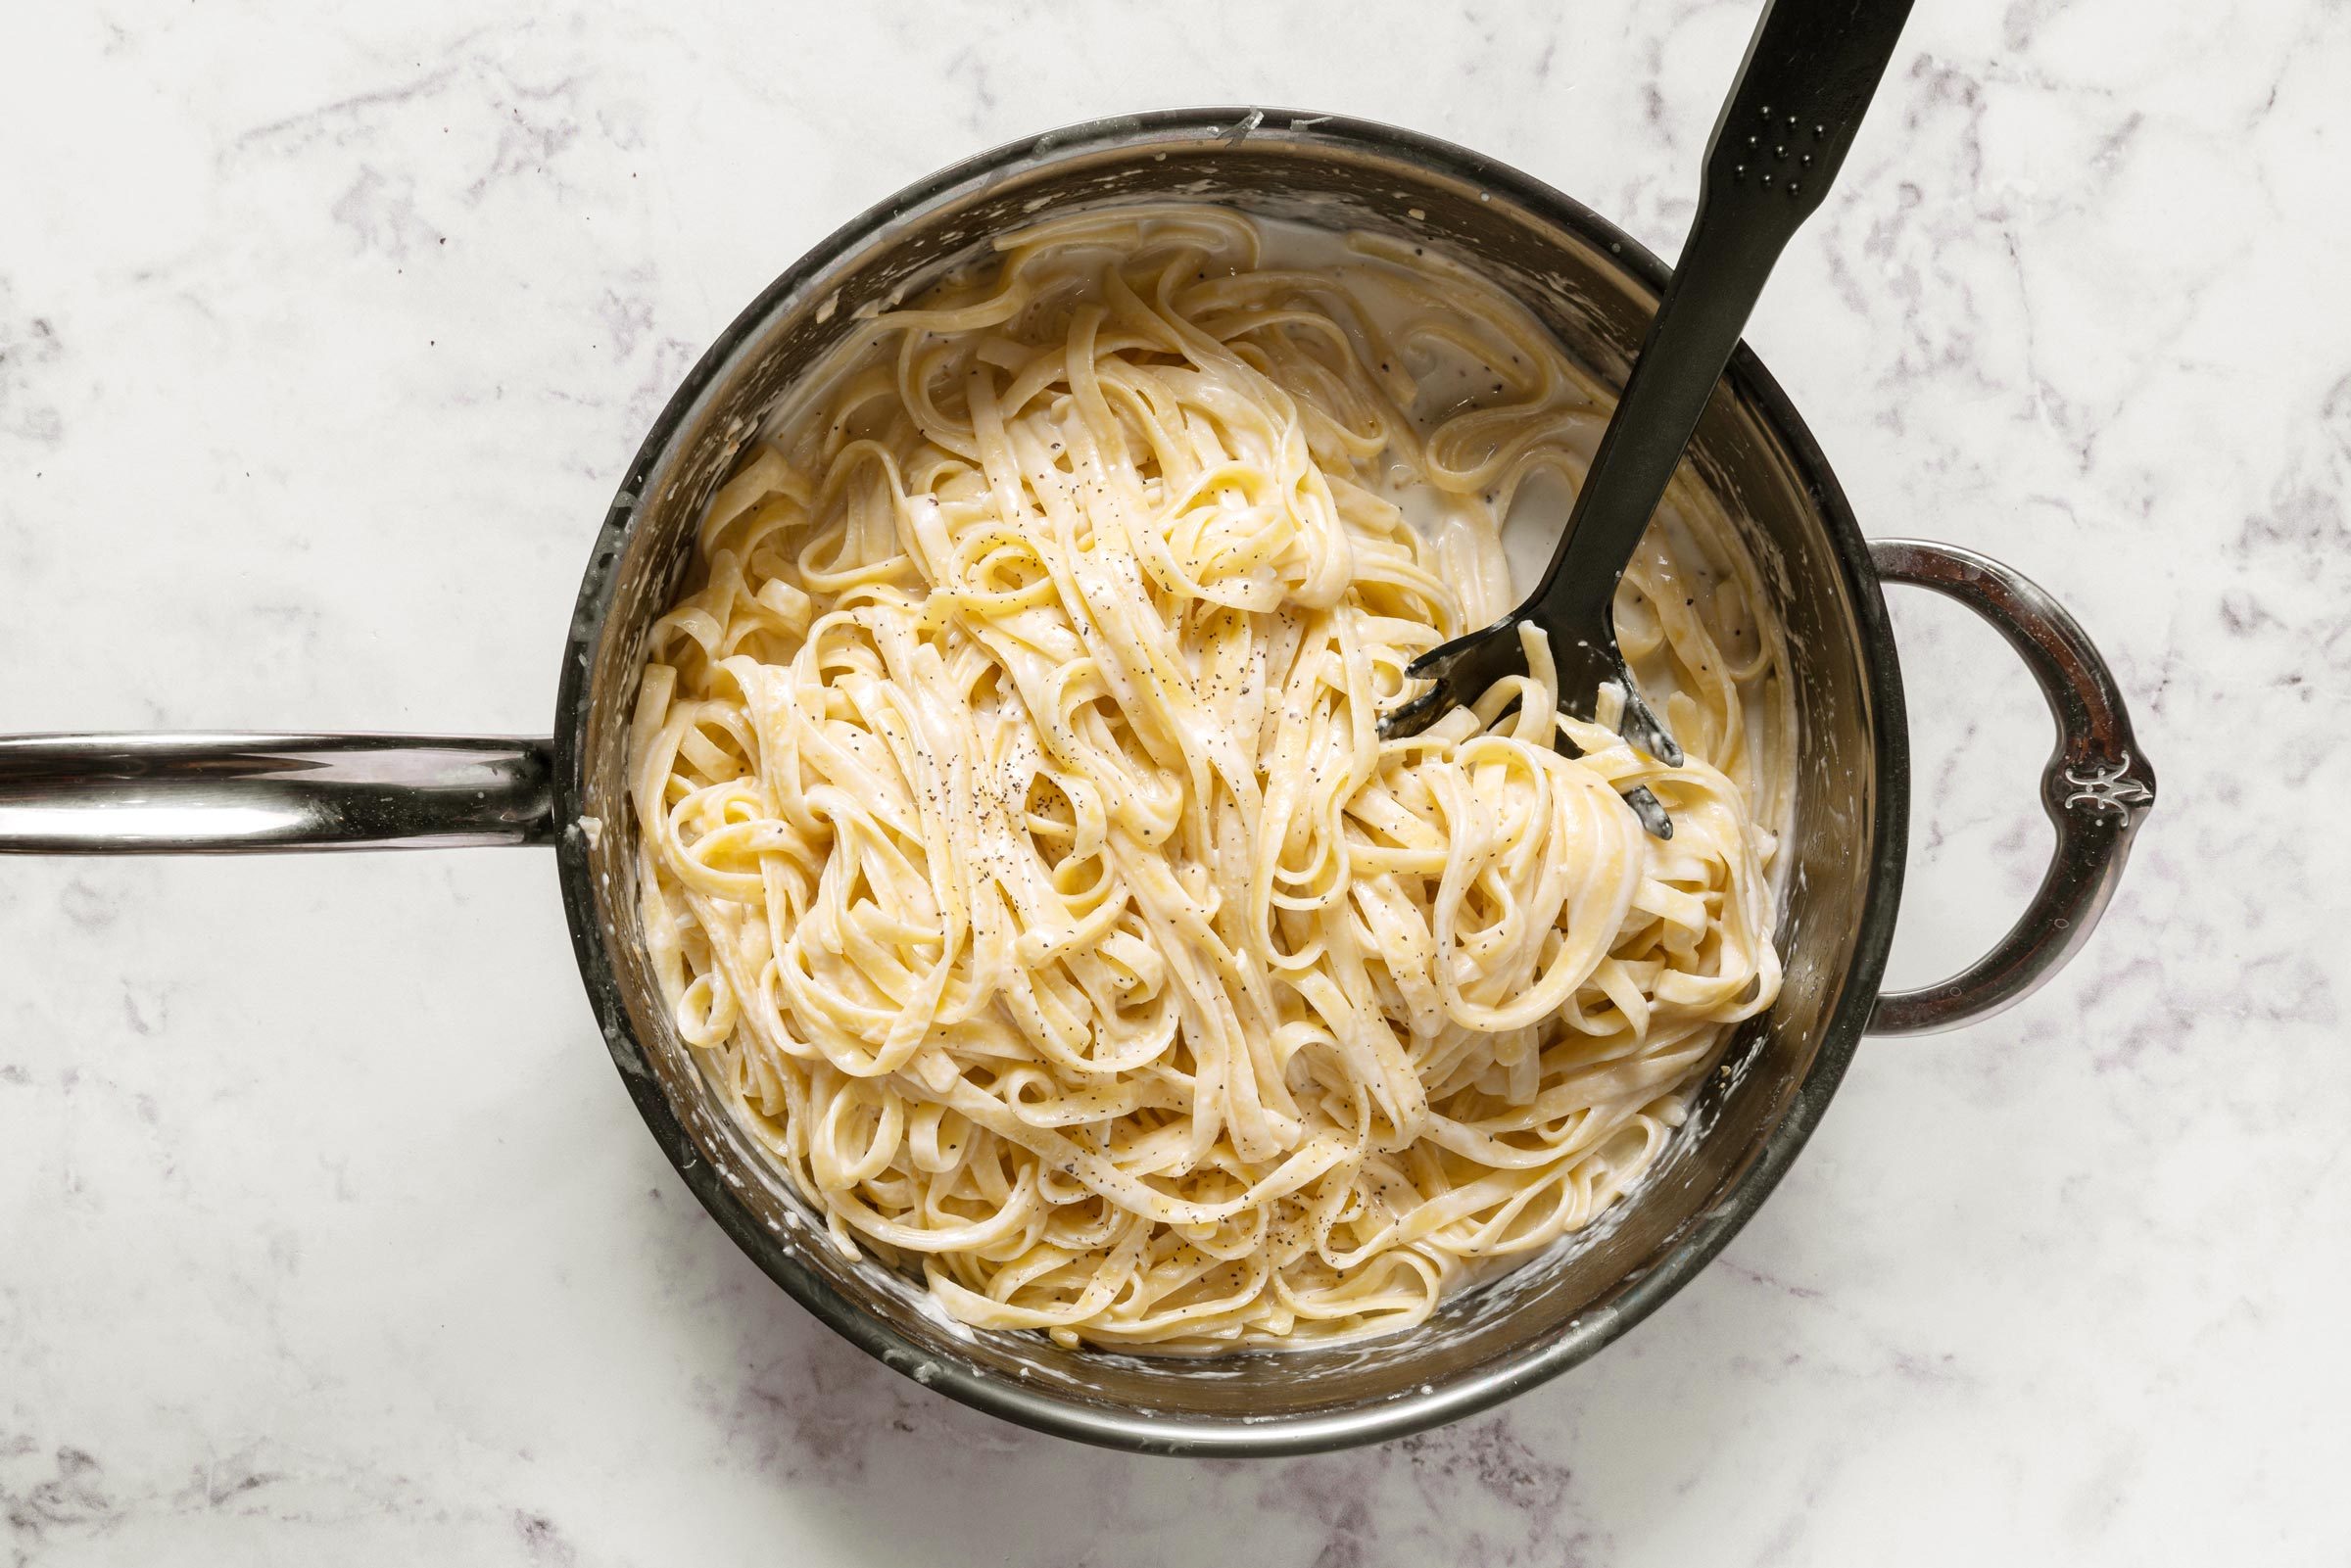 fettuccine in a pot on a marble counter